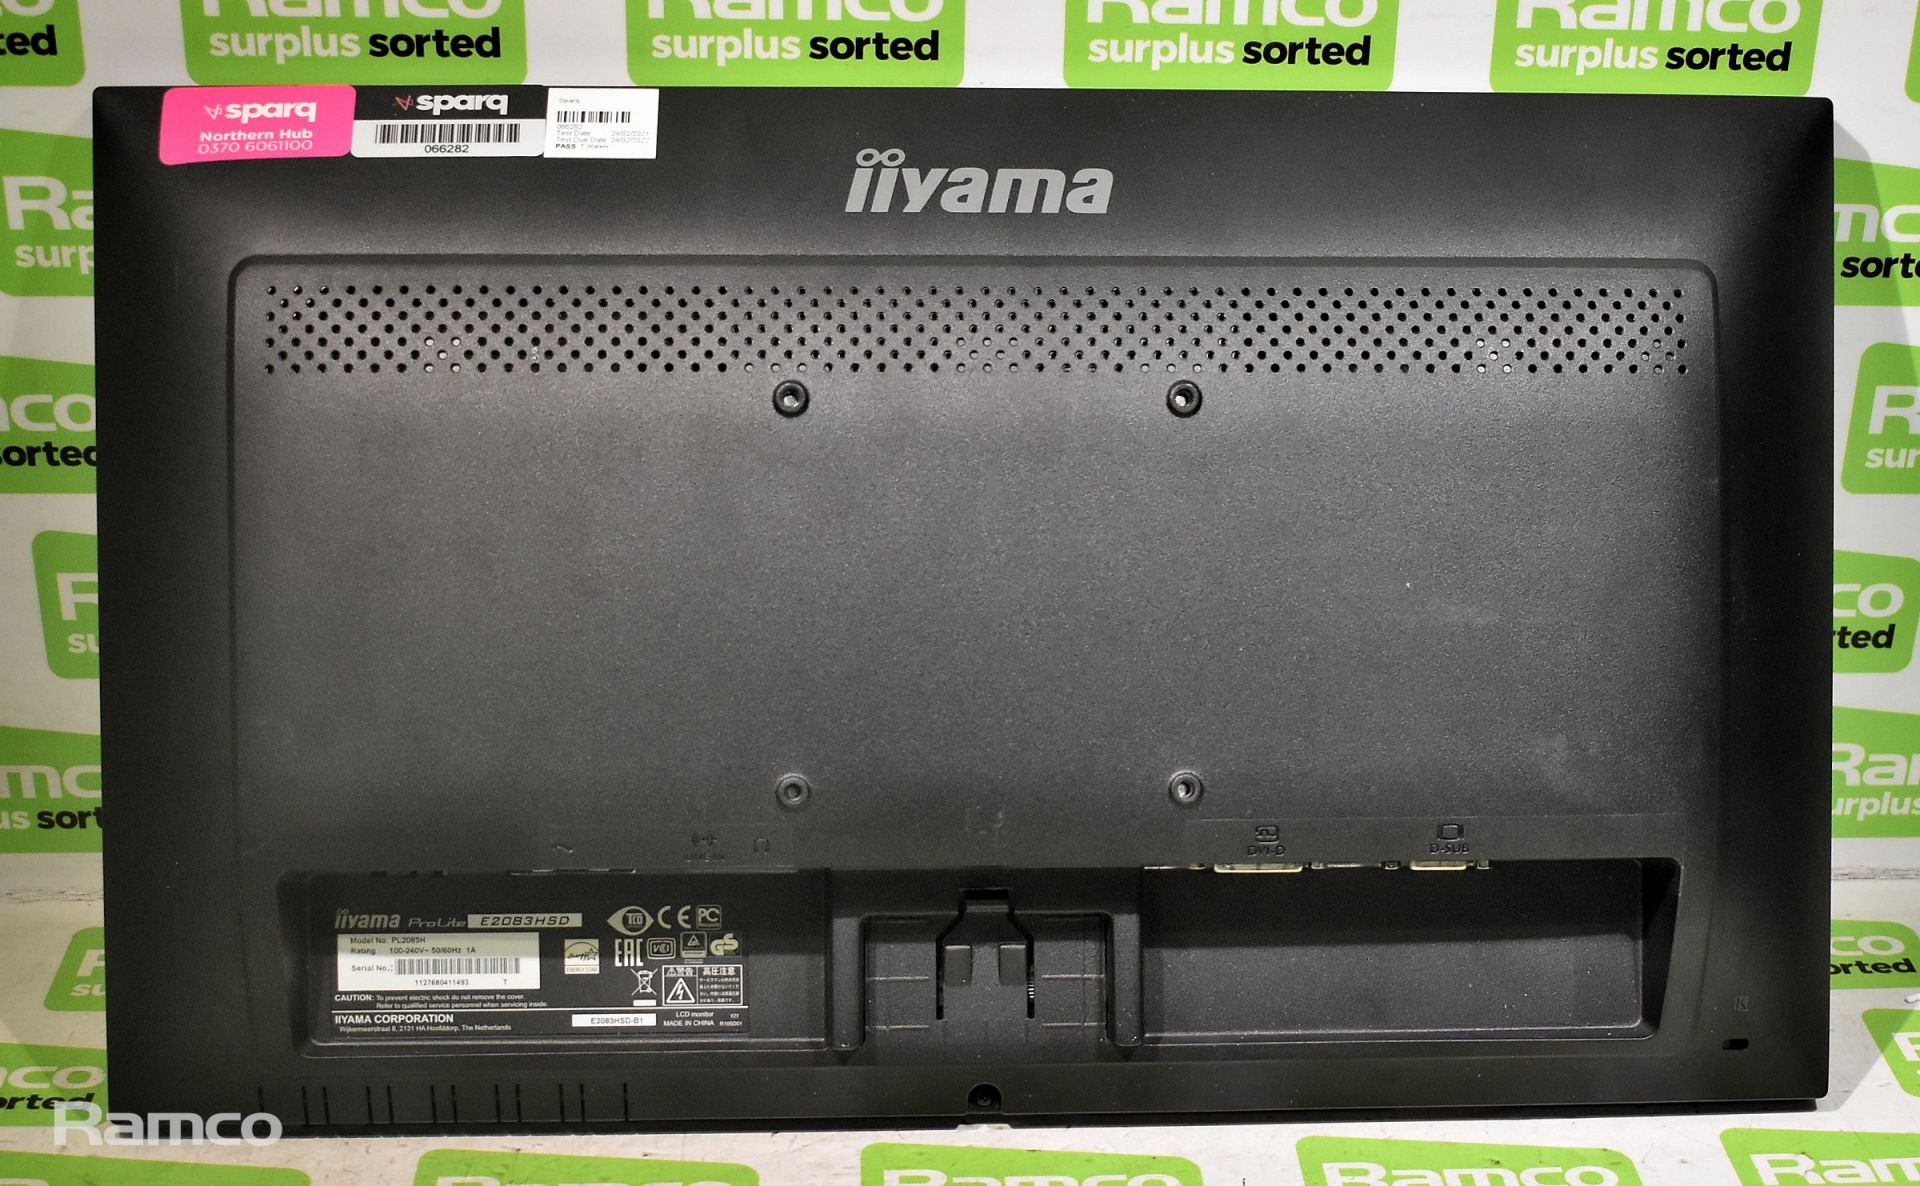 IIyama ProLite E2083HSD 20" monitor with 1600x900 resolution, in box with stand and plug - Image 2 of 4